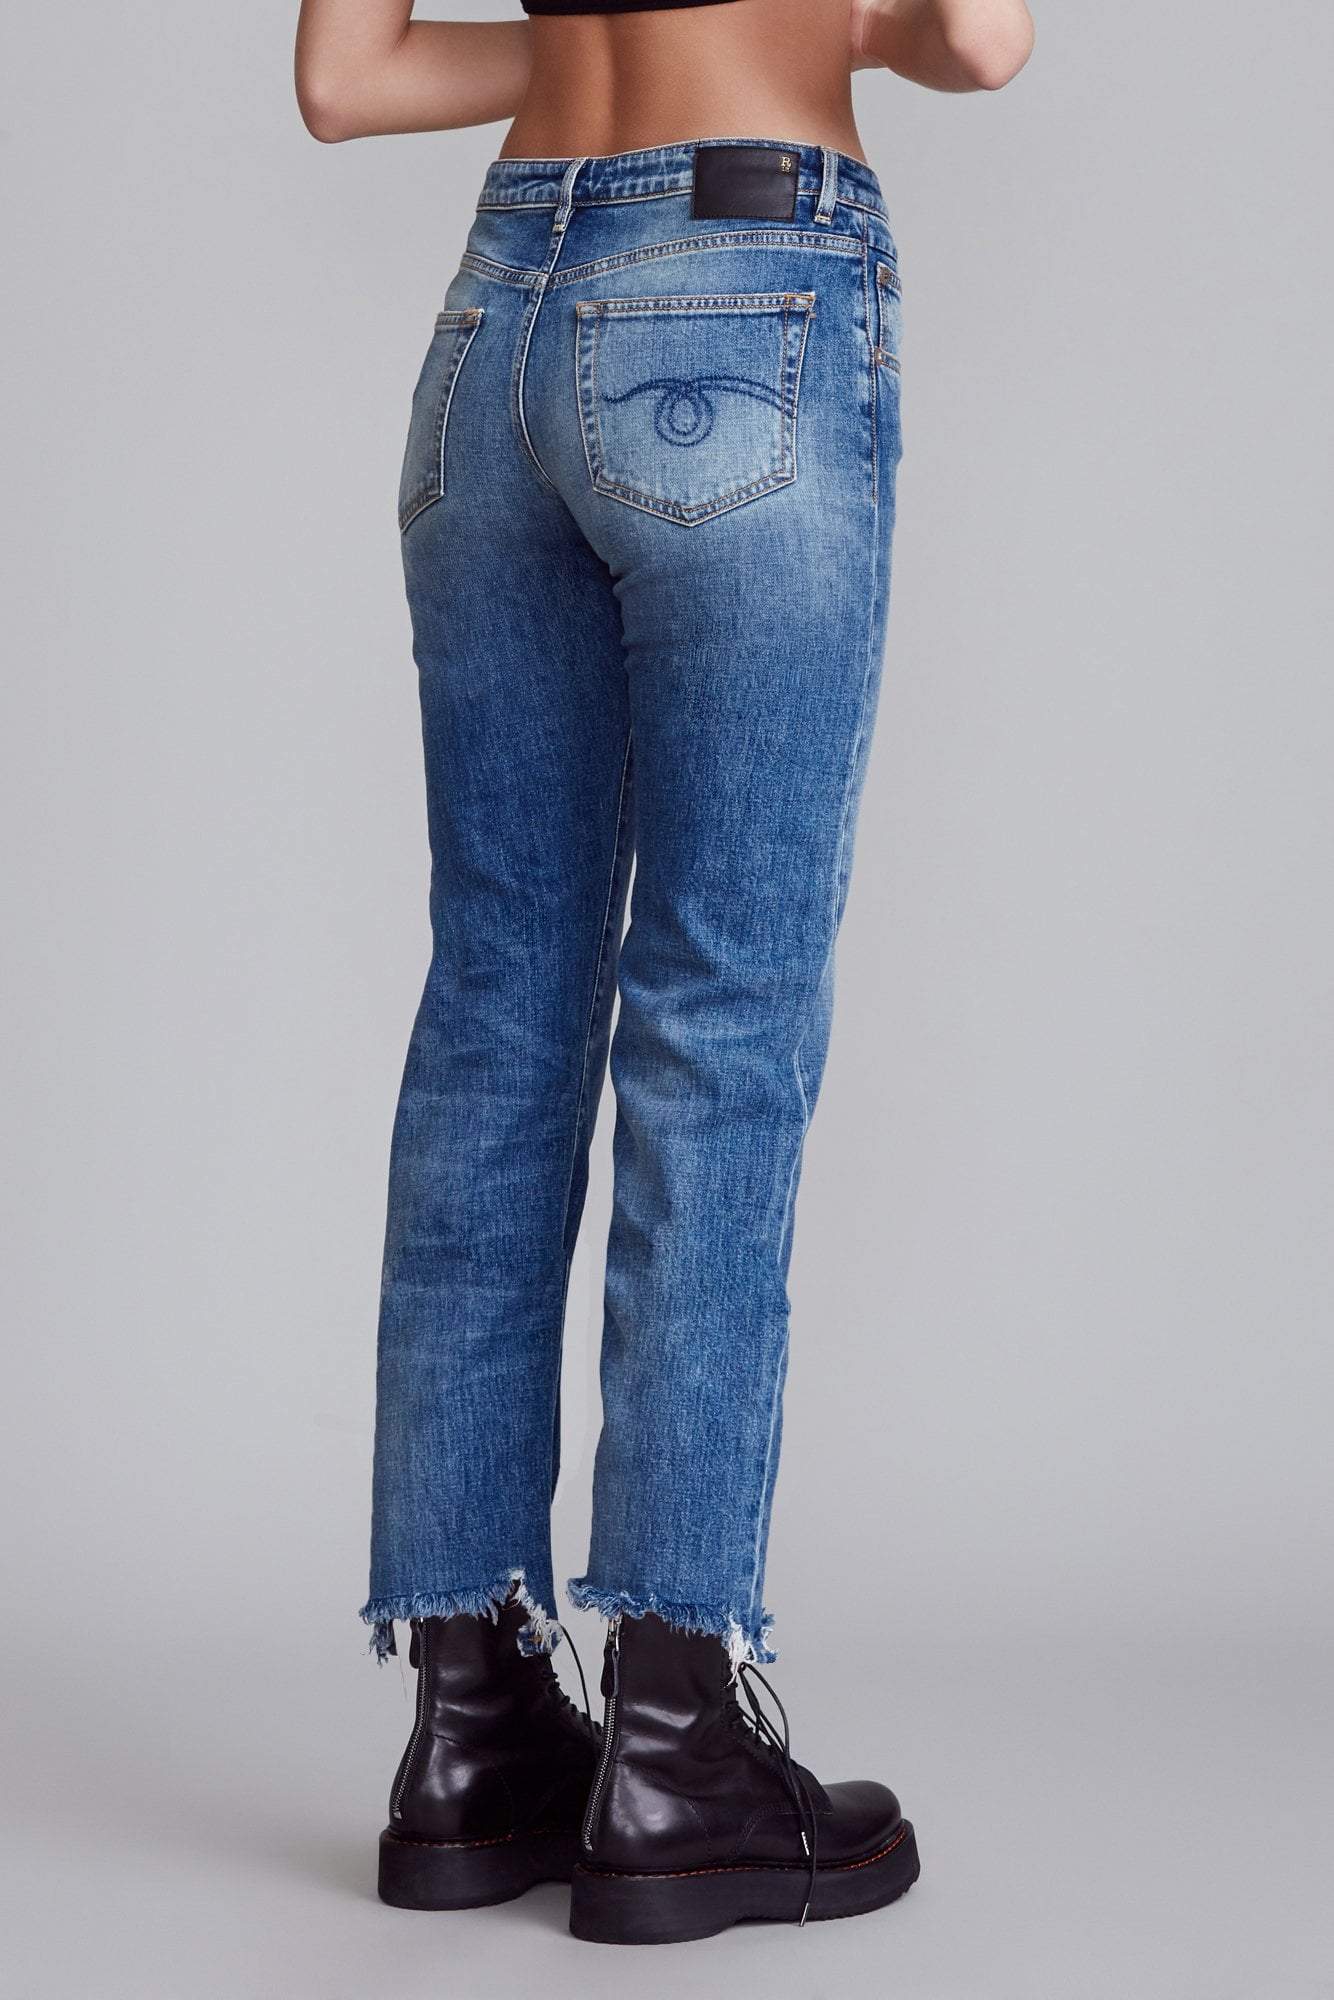 R13 Boy Straight with Rips Jean